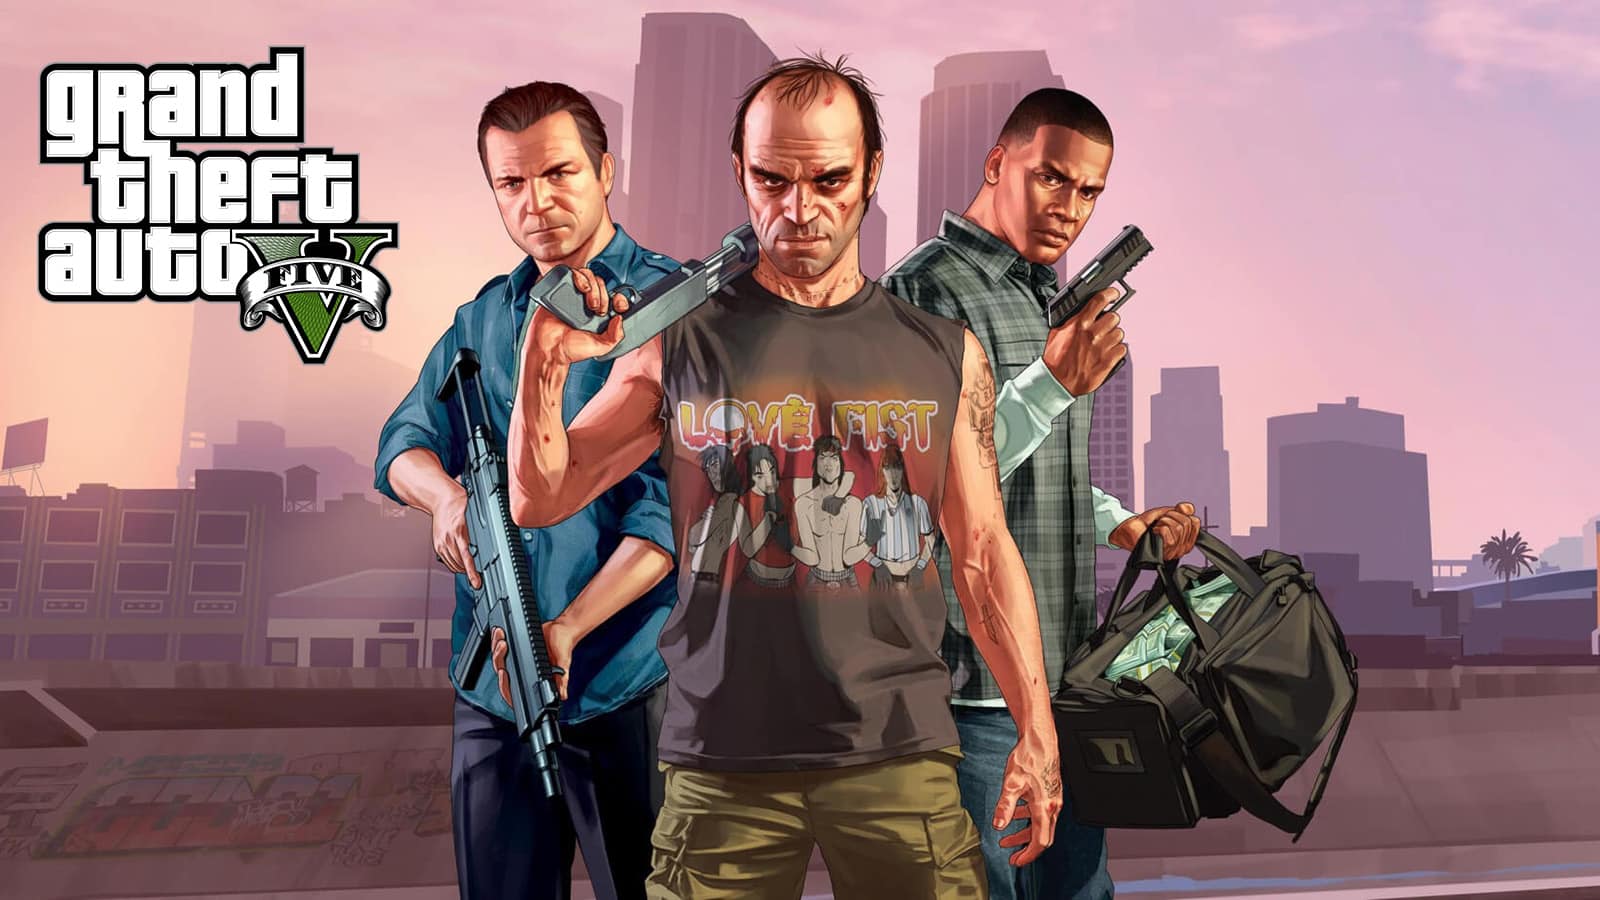 GTA 5 characters Trevor, Michael, and Franklin